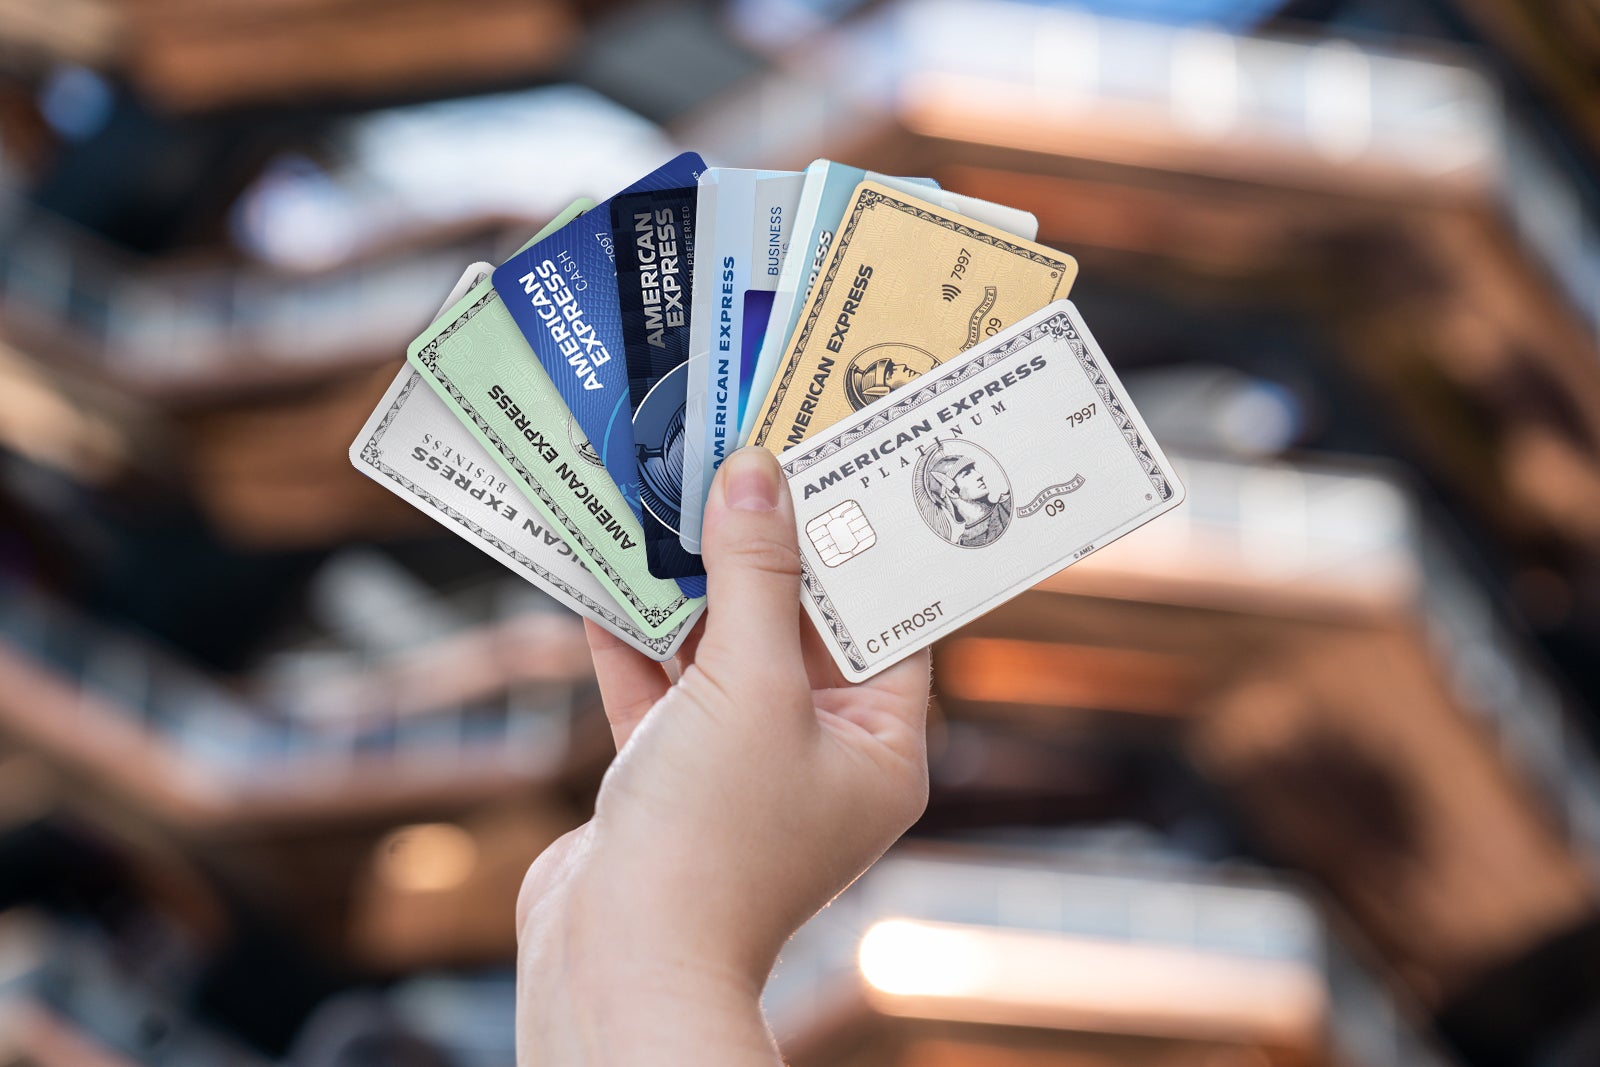 American Express Membership Rewards: The ultimate guide - The Points Guy